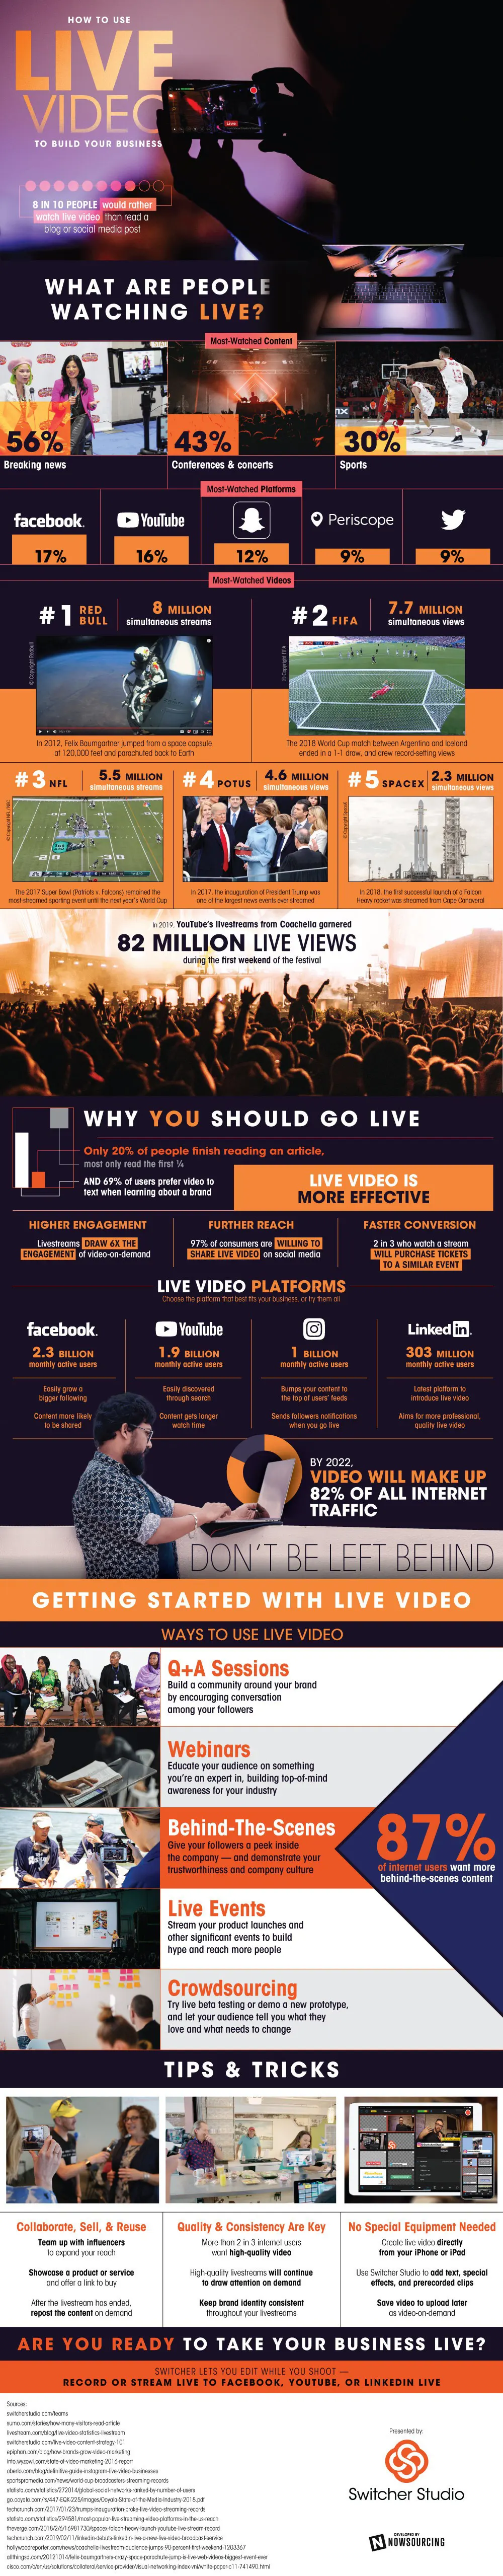 How To Use Live Video for Your Business